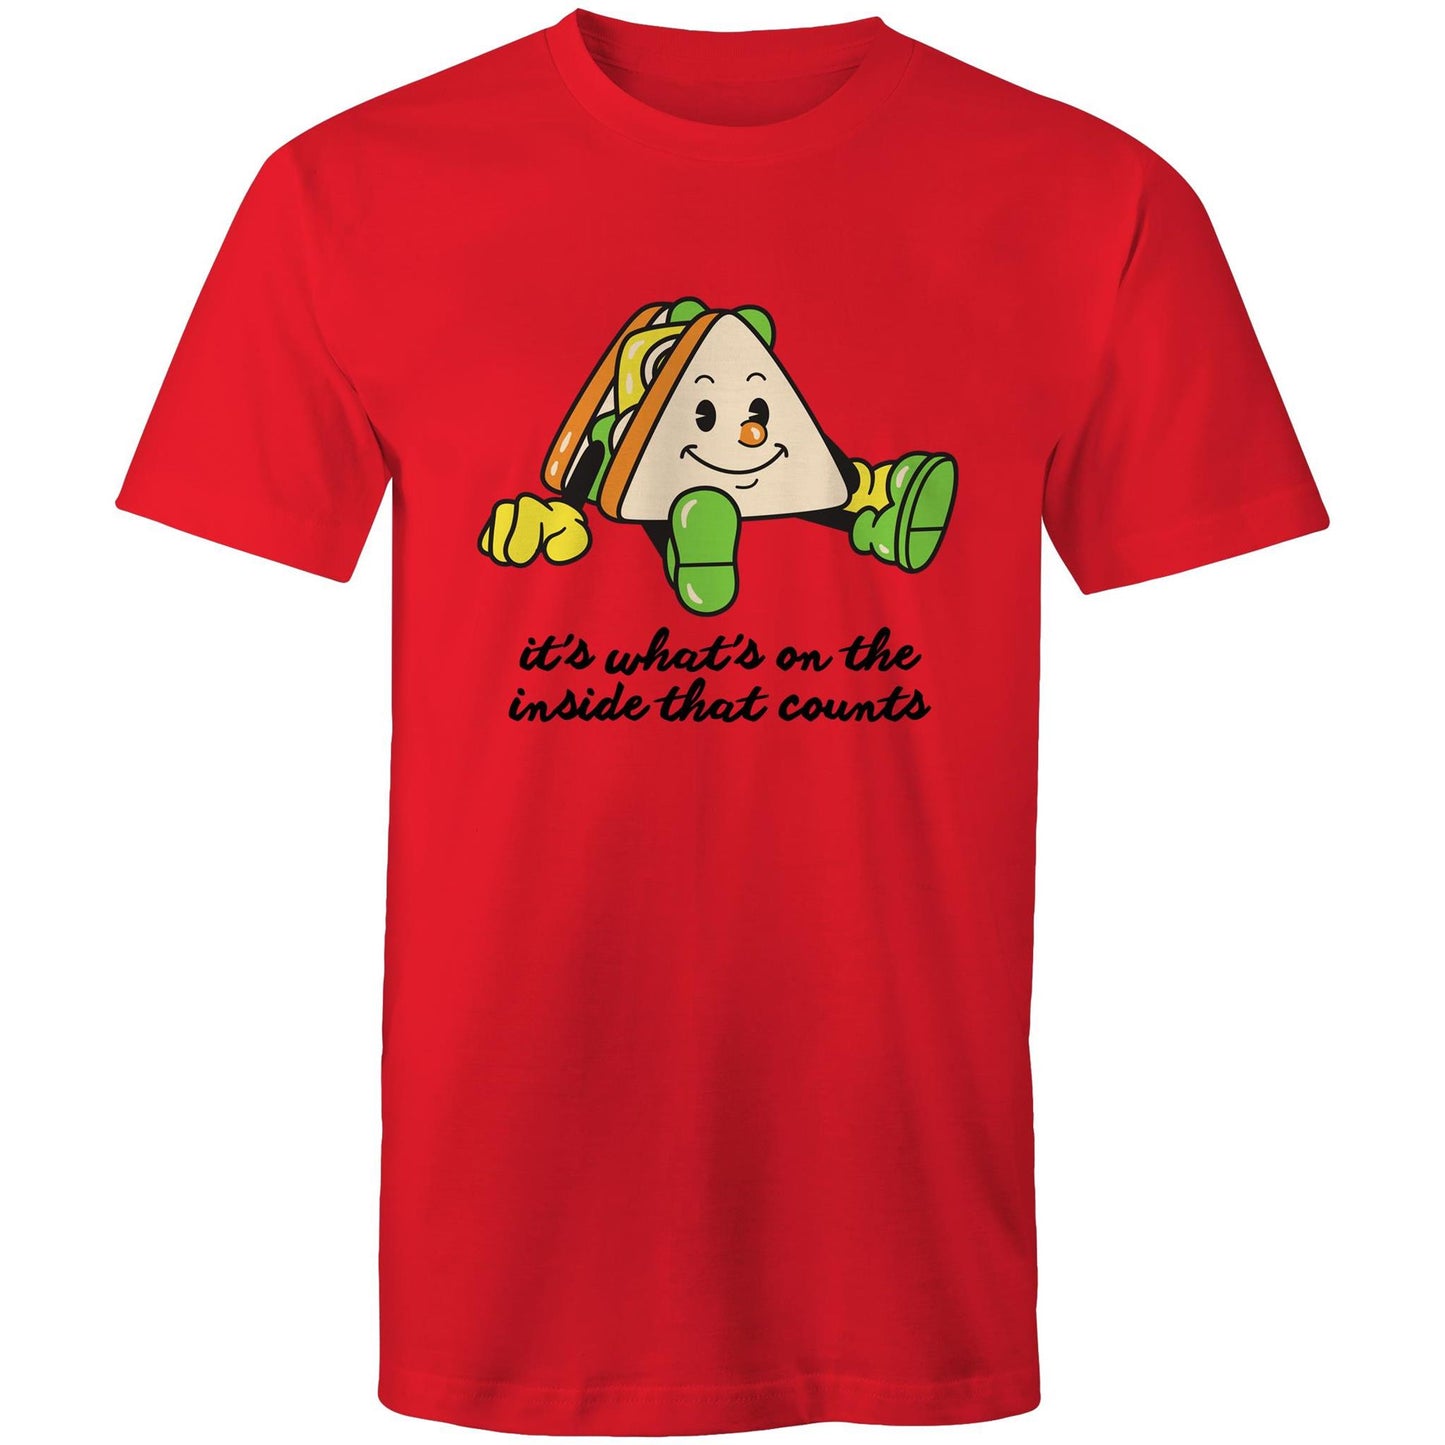 Sandwich, It's What's On The Inside That Counts - Mens T-Shirt Red Mens T-shirt Food Motivation